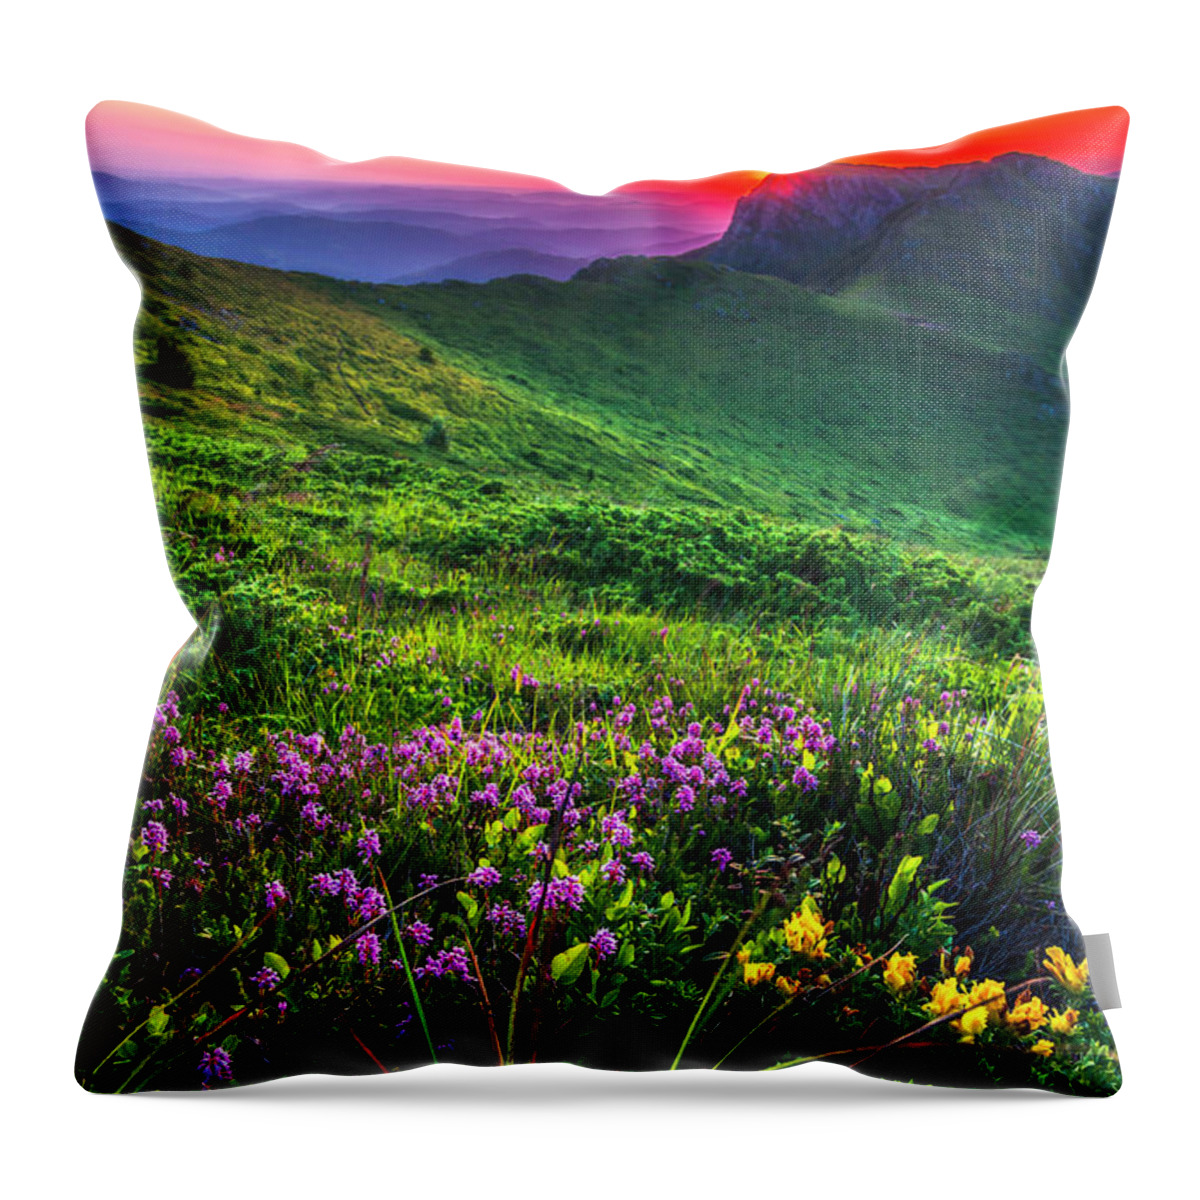 Balkan Mountains Throw Pillow featuring the photograph Goat Wall by Evgeni Dinev